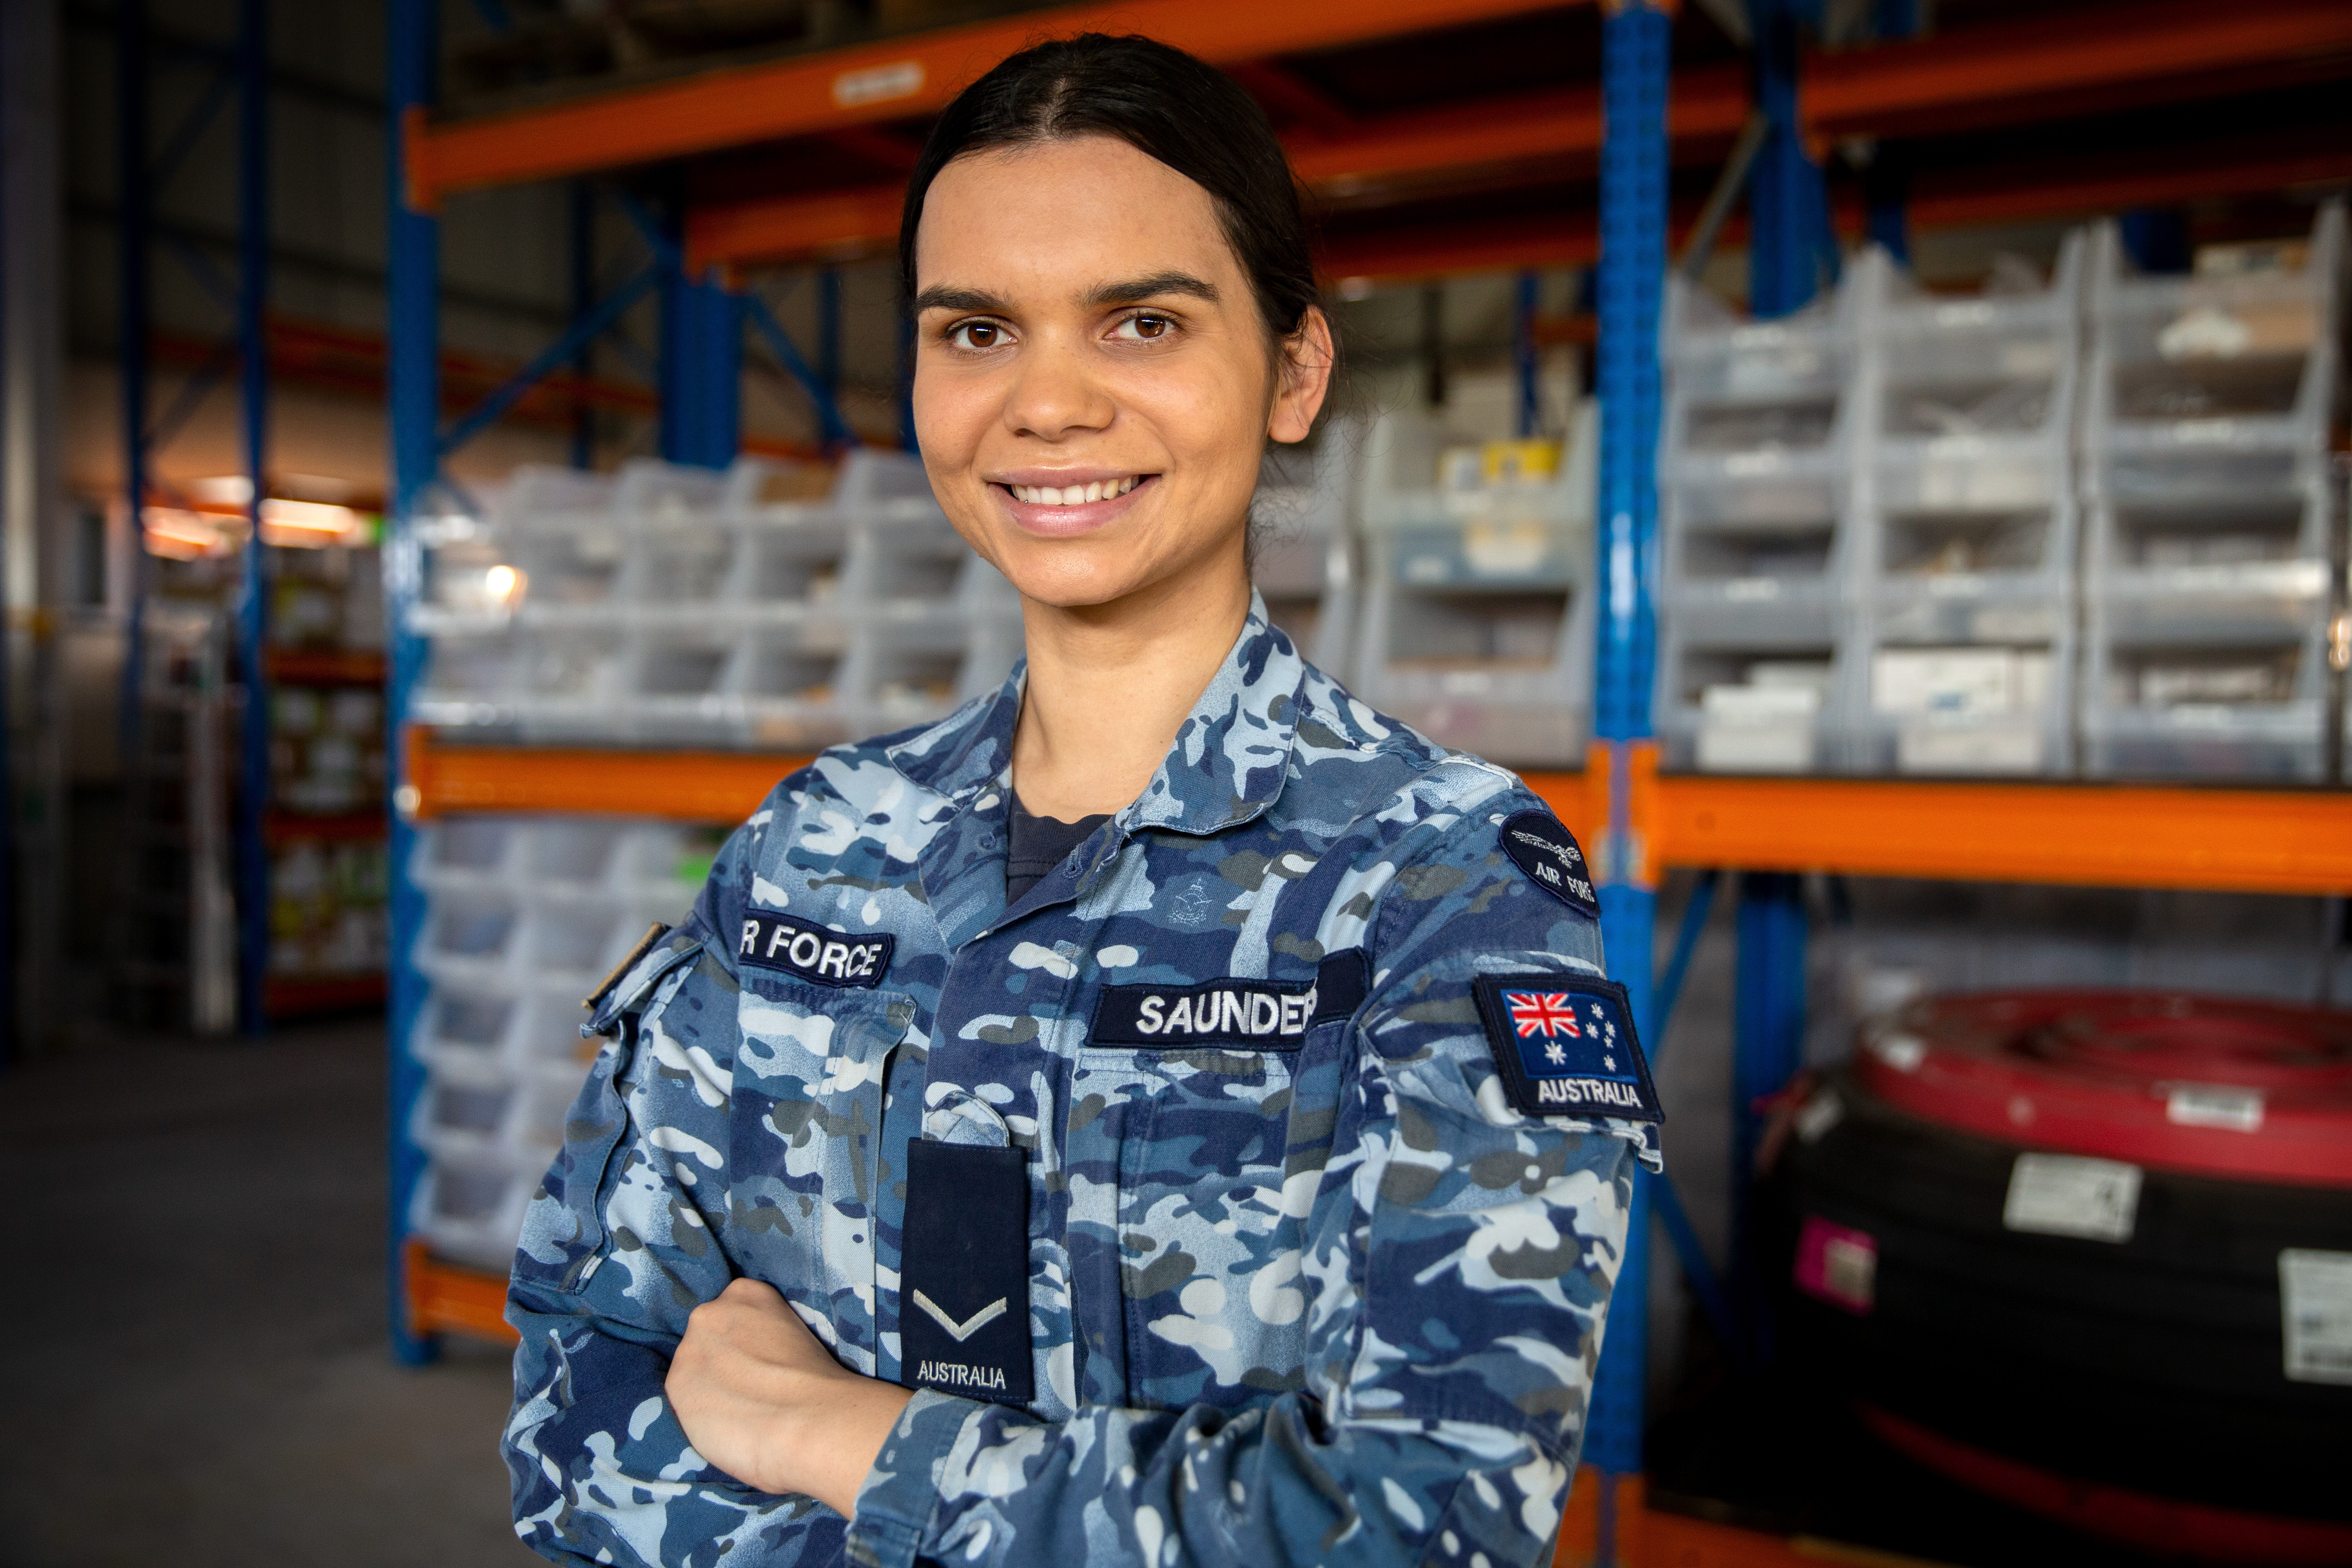 An Air Force member in uniform smiling with her arms crossed.